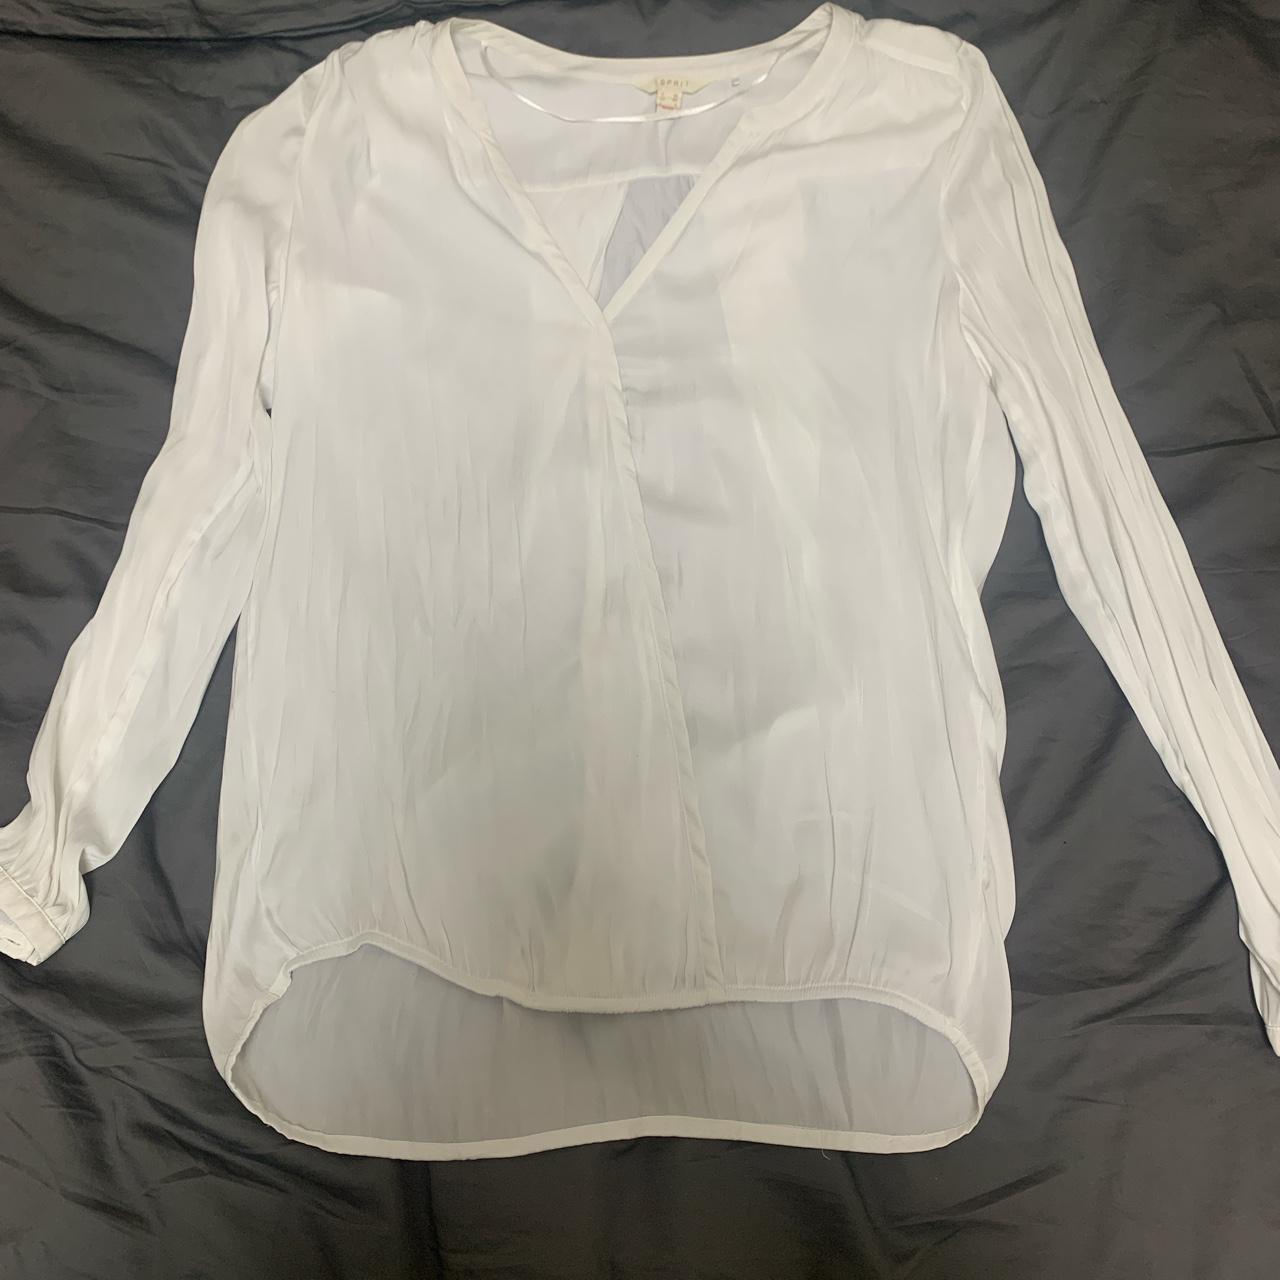 white blouse from esprit - Depop